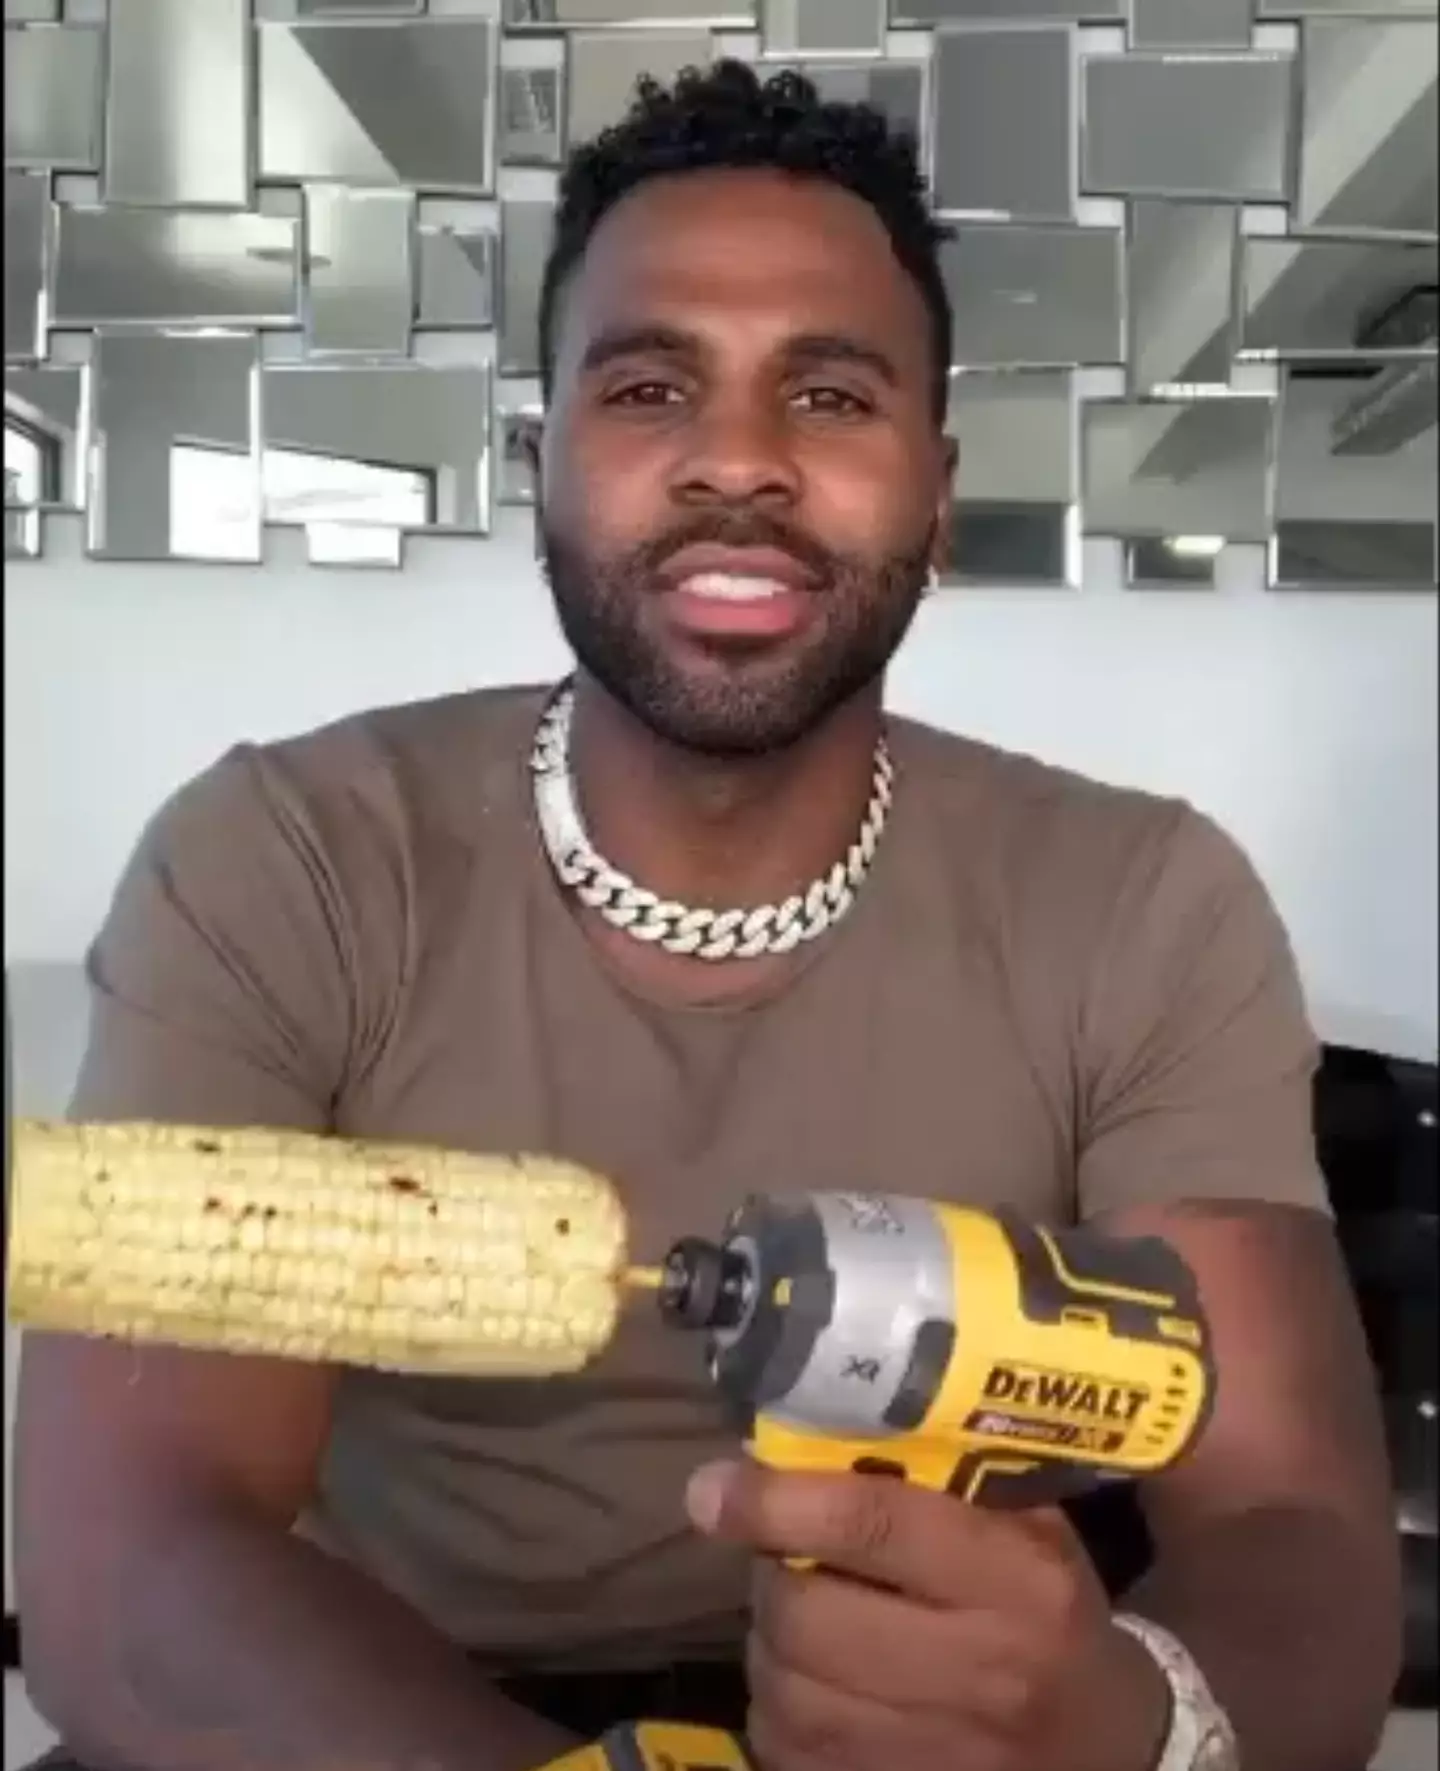 The singer appeared to lose a tooth after hopping on a popular TikTok food trend.(Jason Derulo/TikTok)